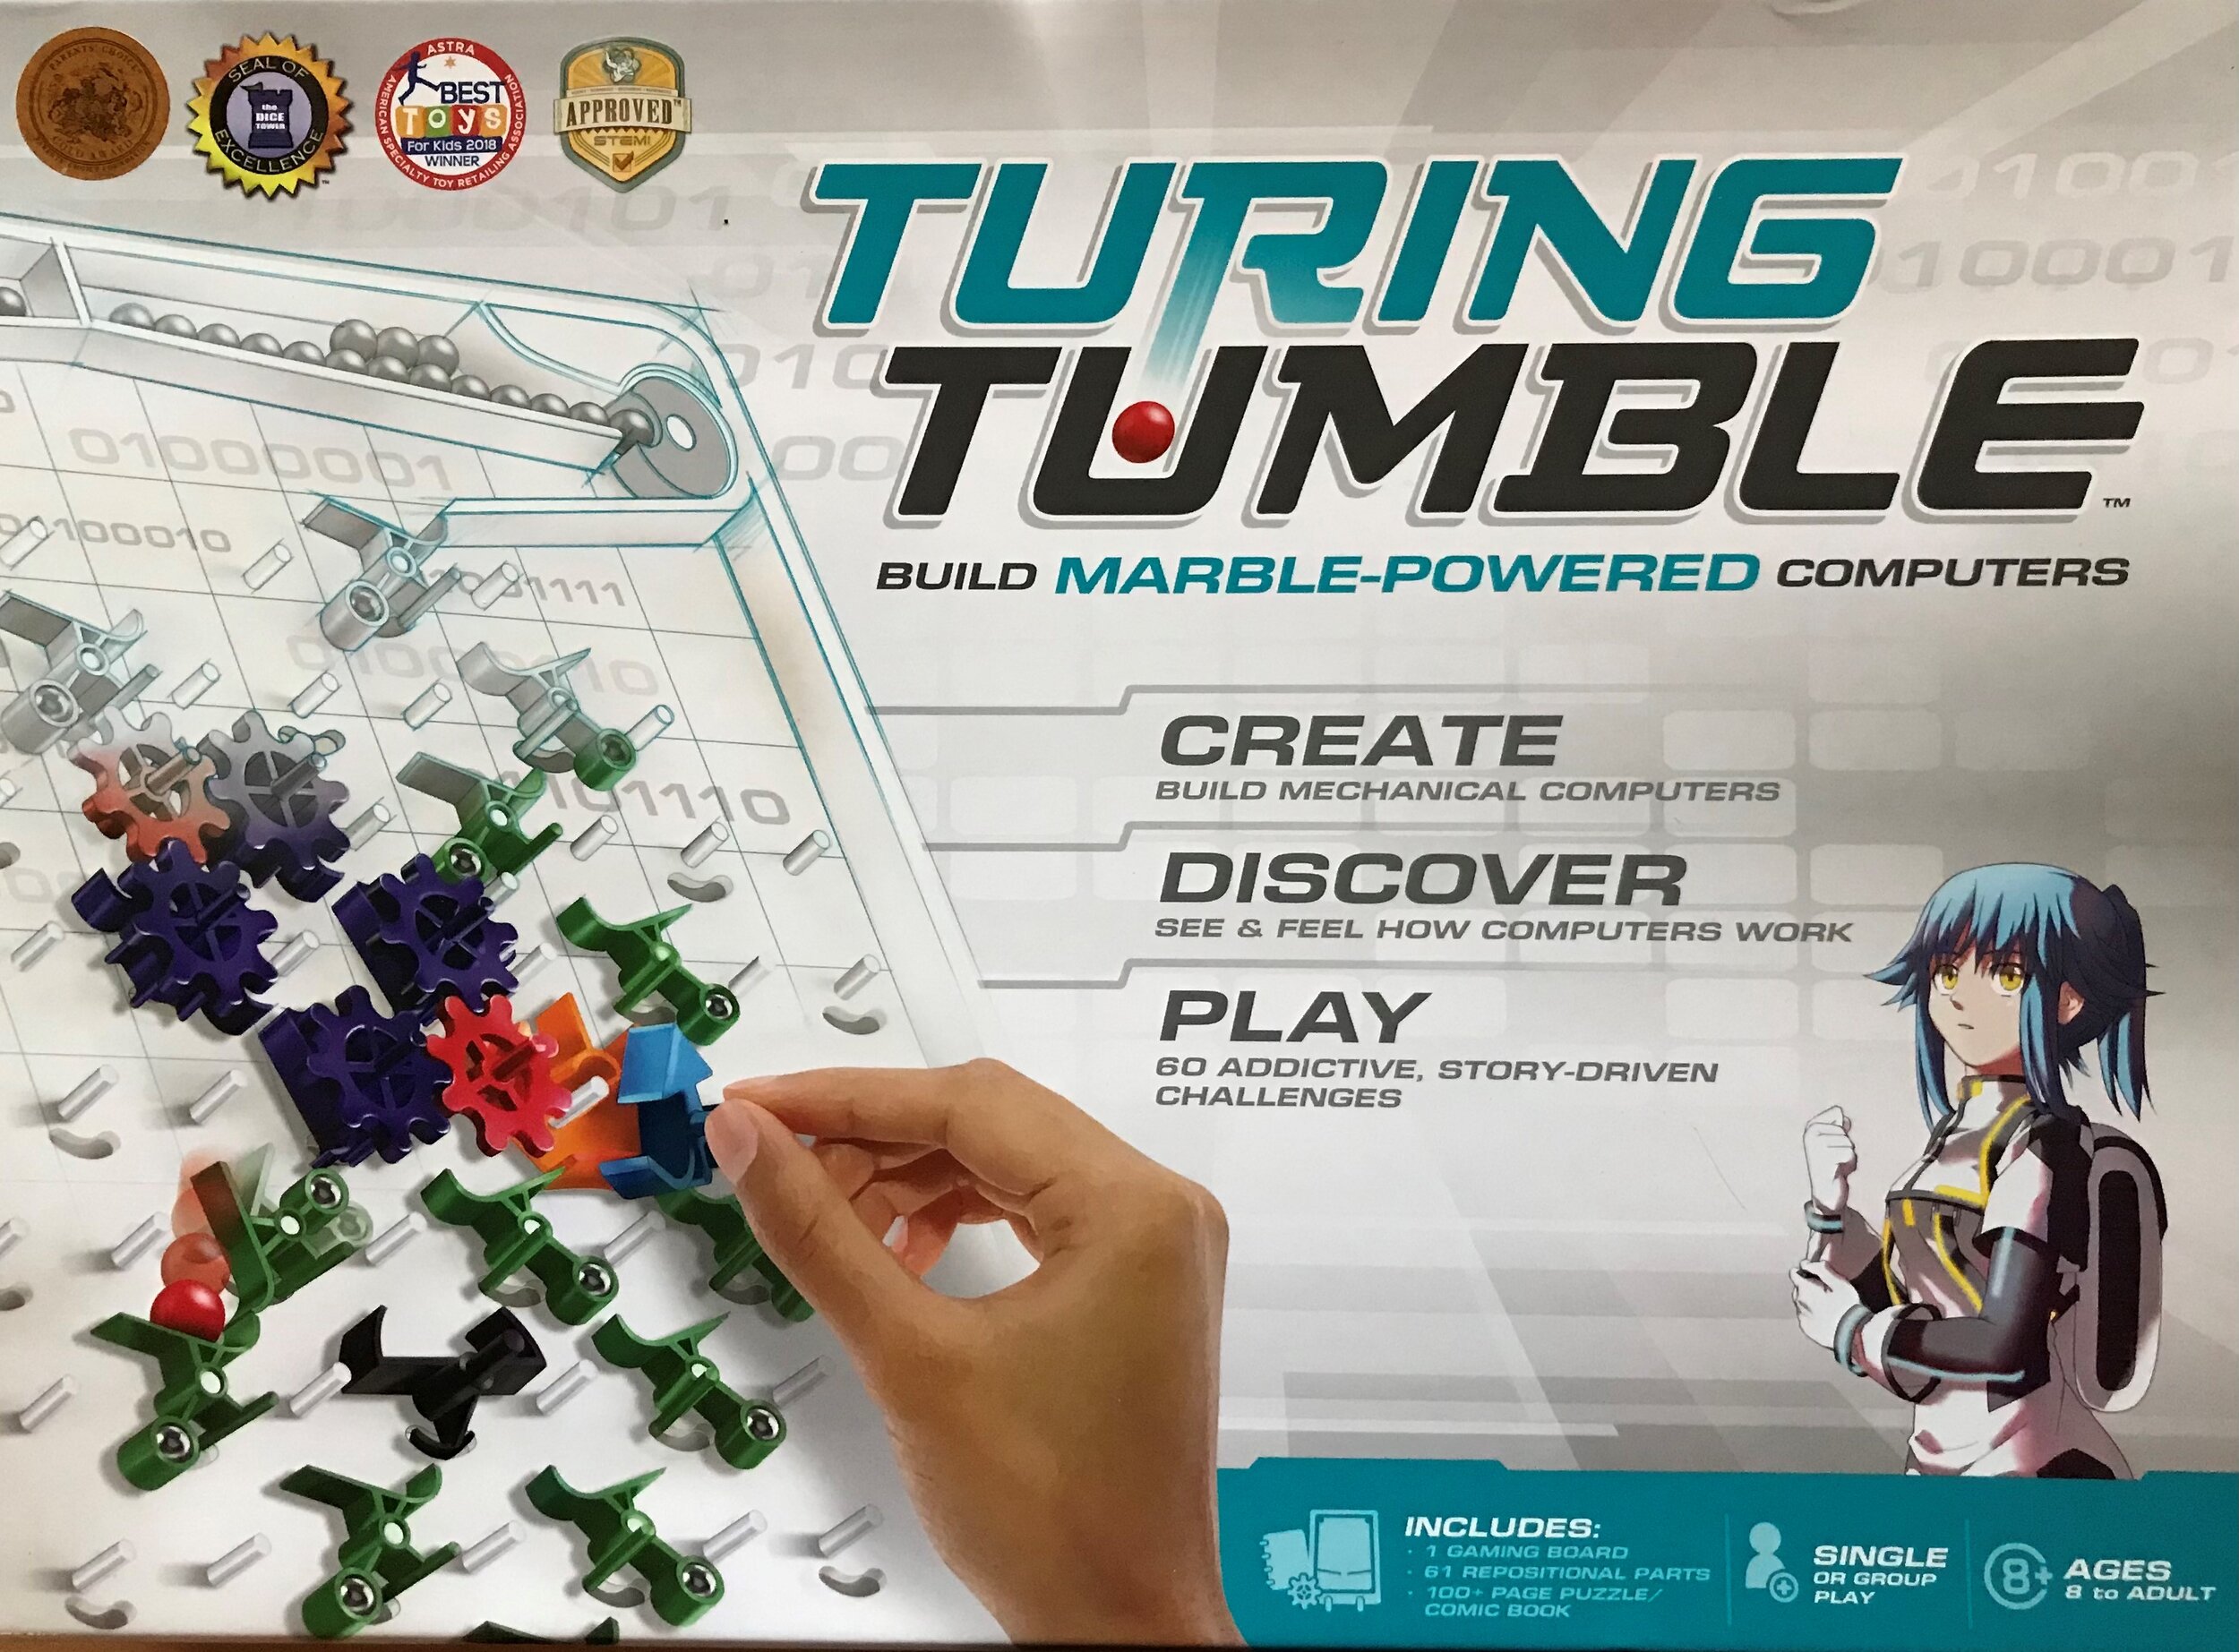 Turing Tumble Replacement Puzzle Book – Upper Story